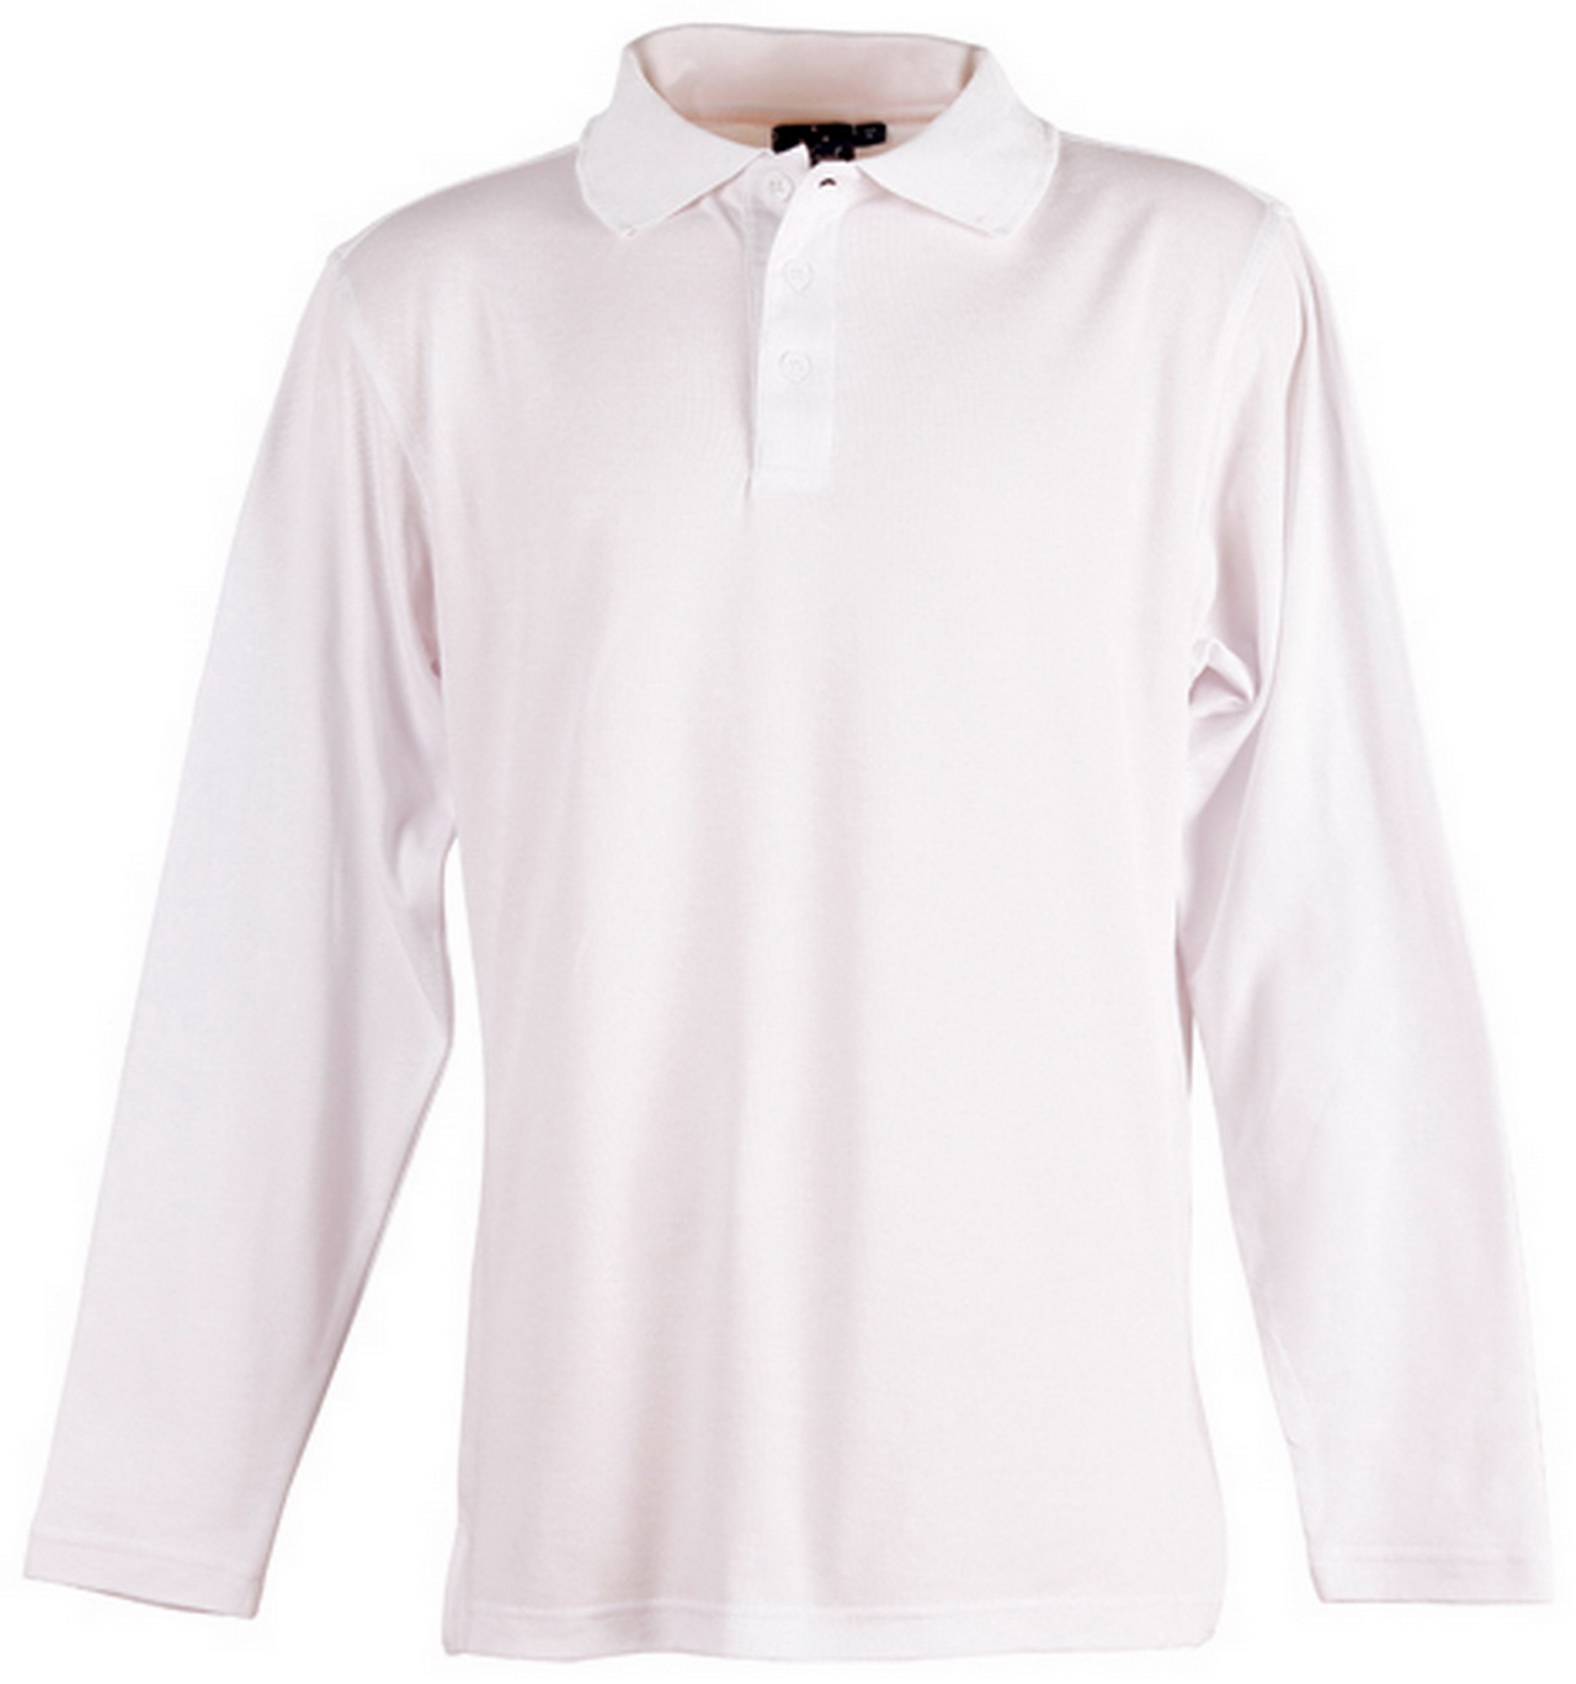 PS35 Victory Plus Long Sleeve Polo